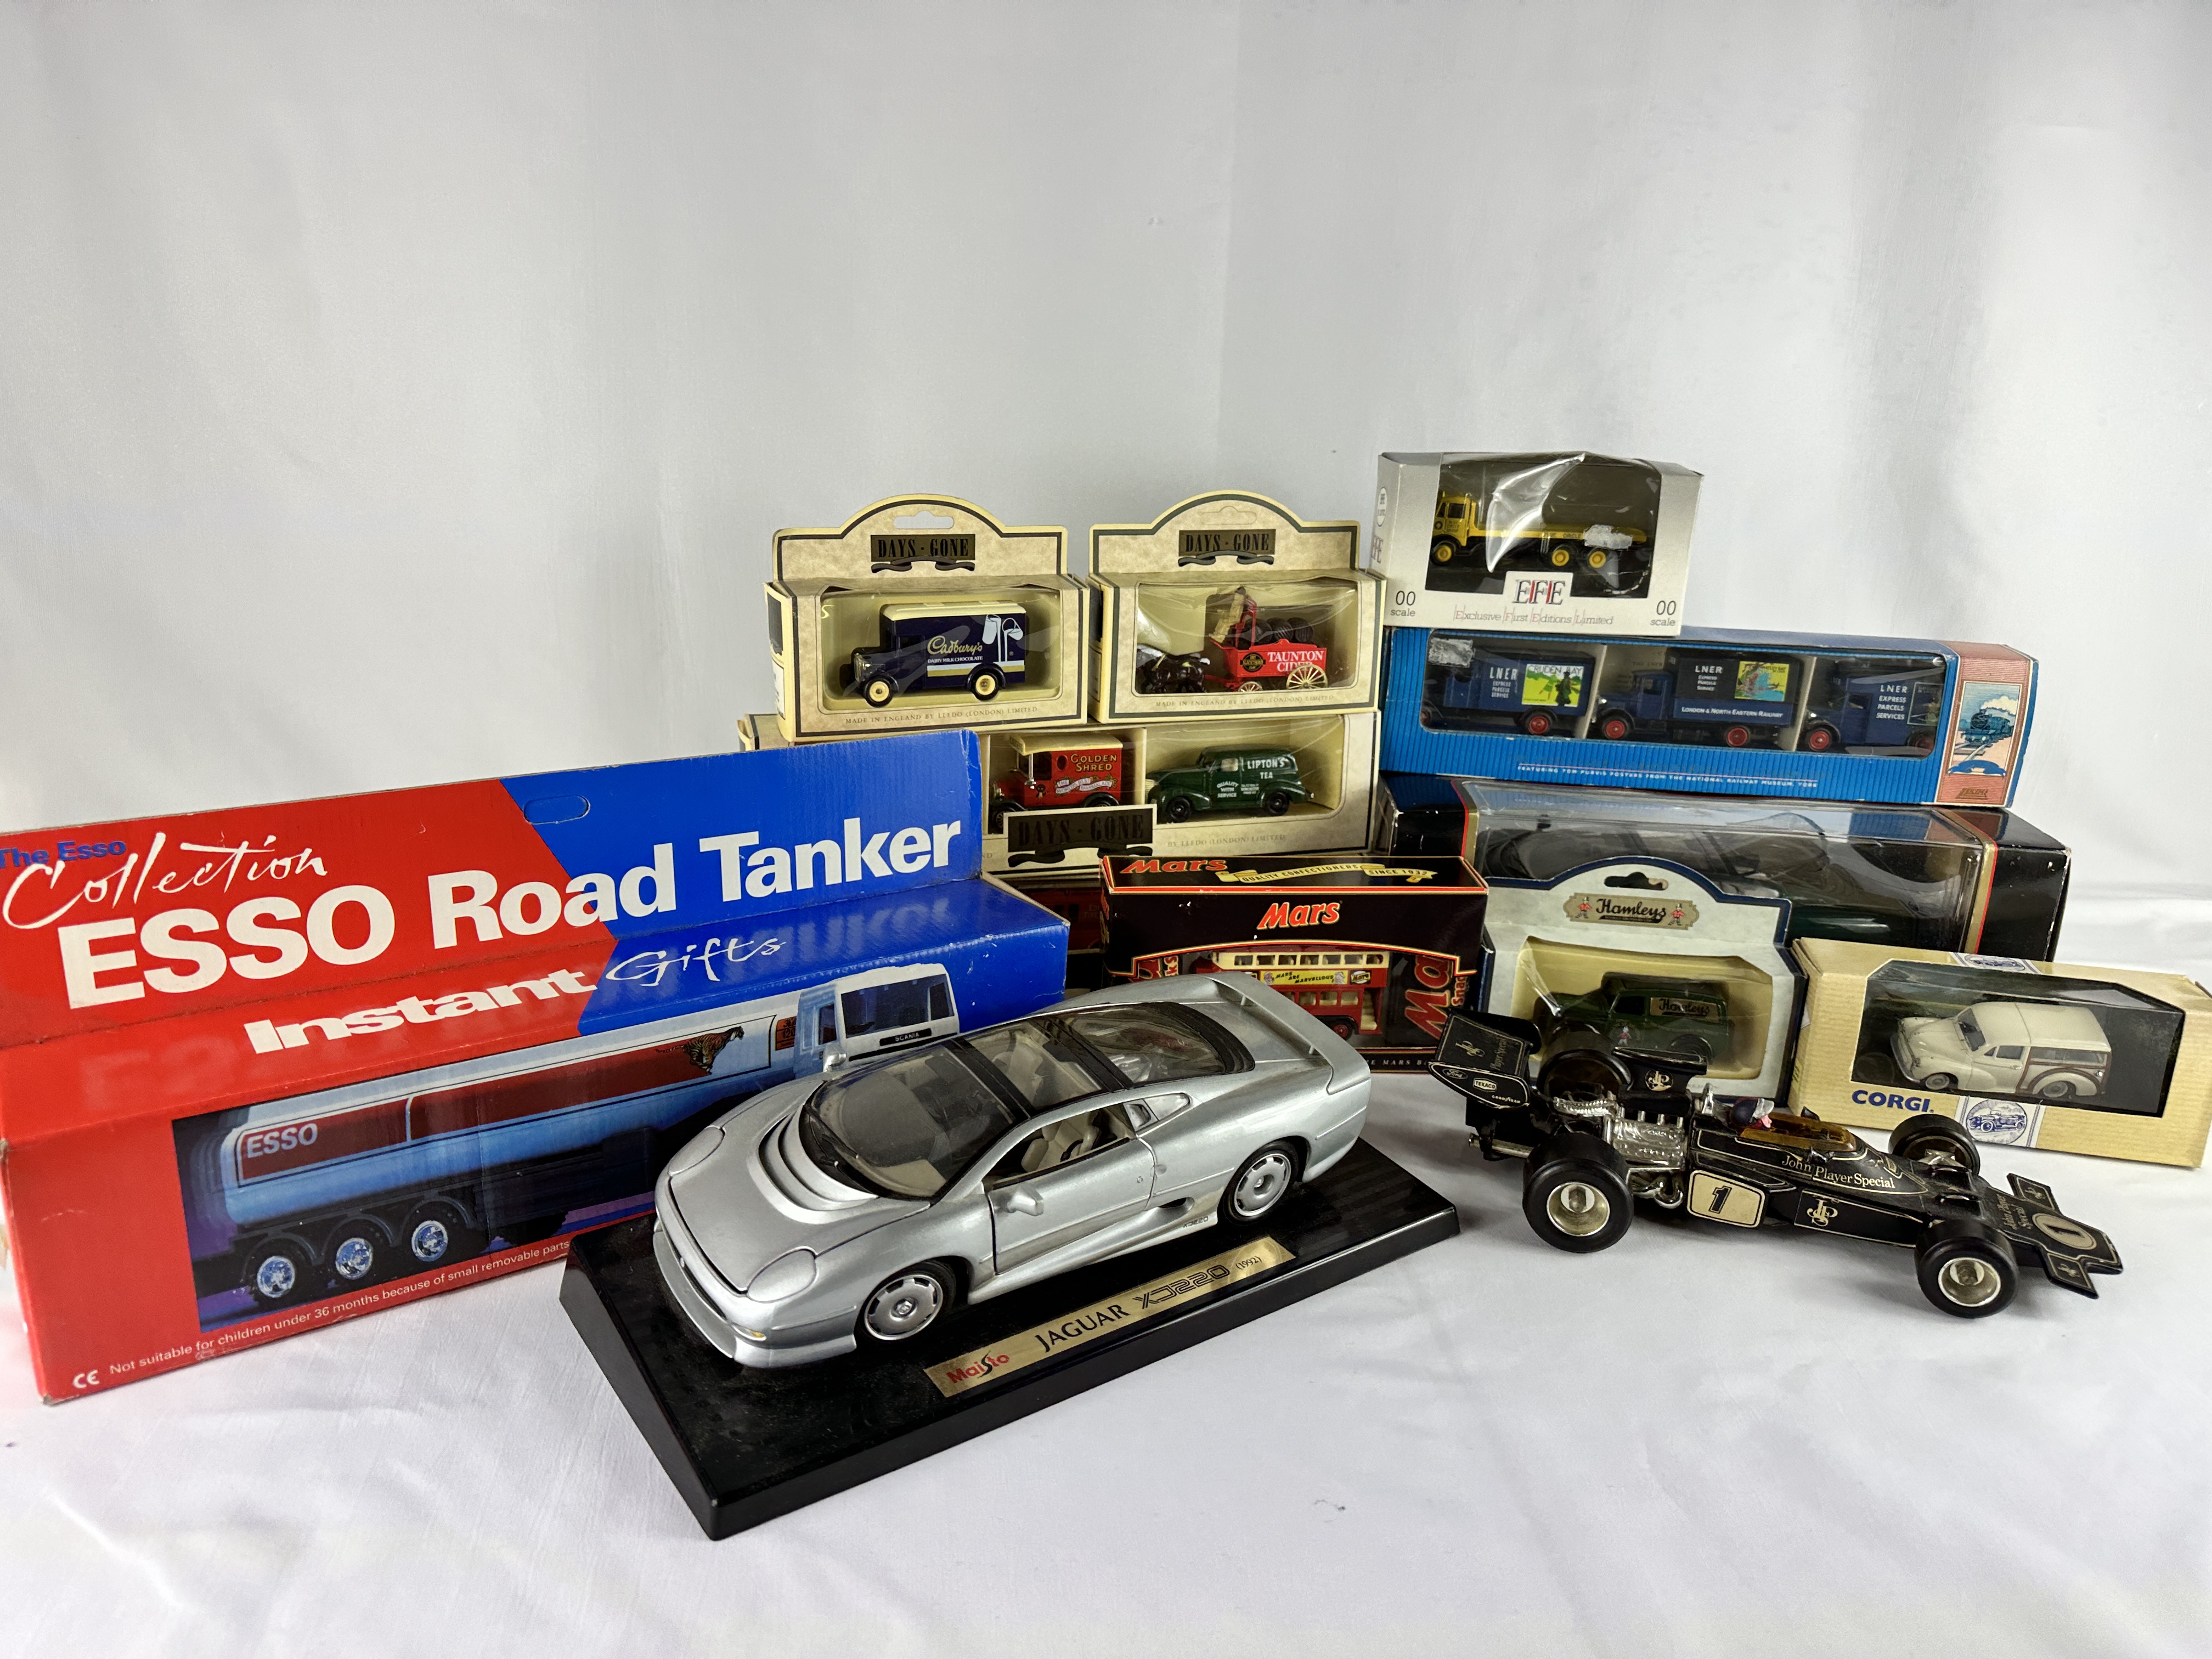 Corgi F1 model car, together with other model vehicles